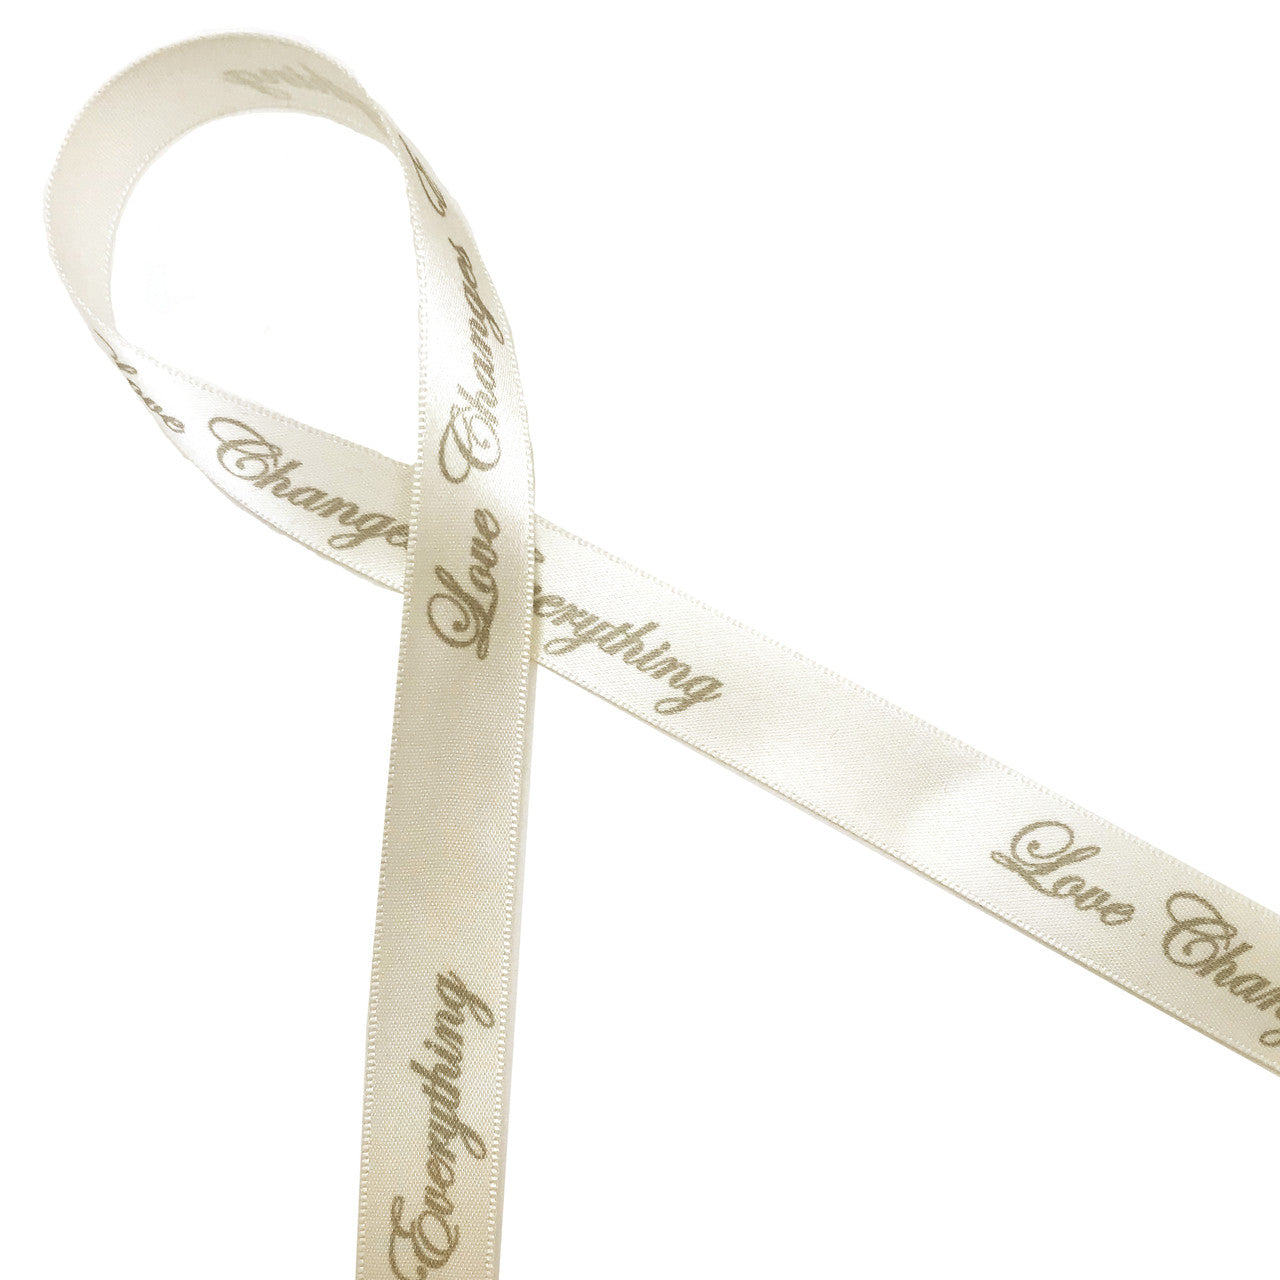 Love Changes Everything Ribbon Champagne Ink on 5/8" wide Antique White Satin Ribbon